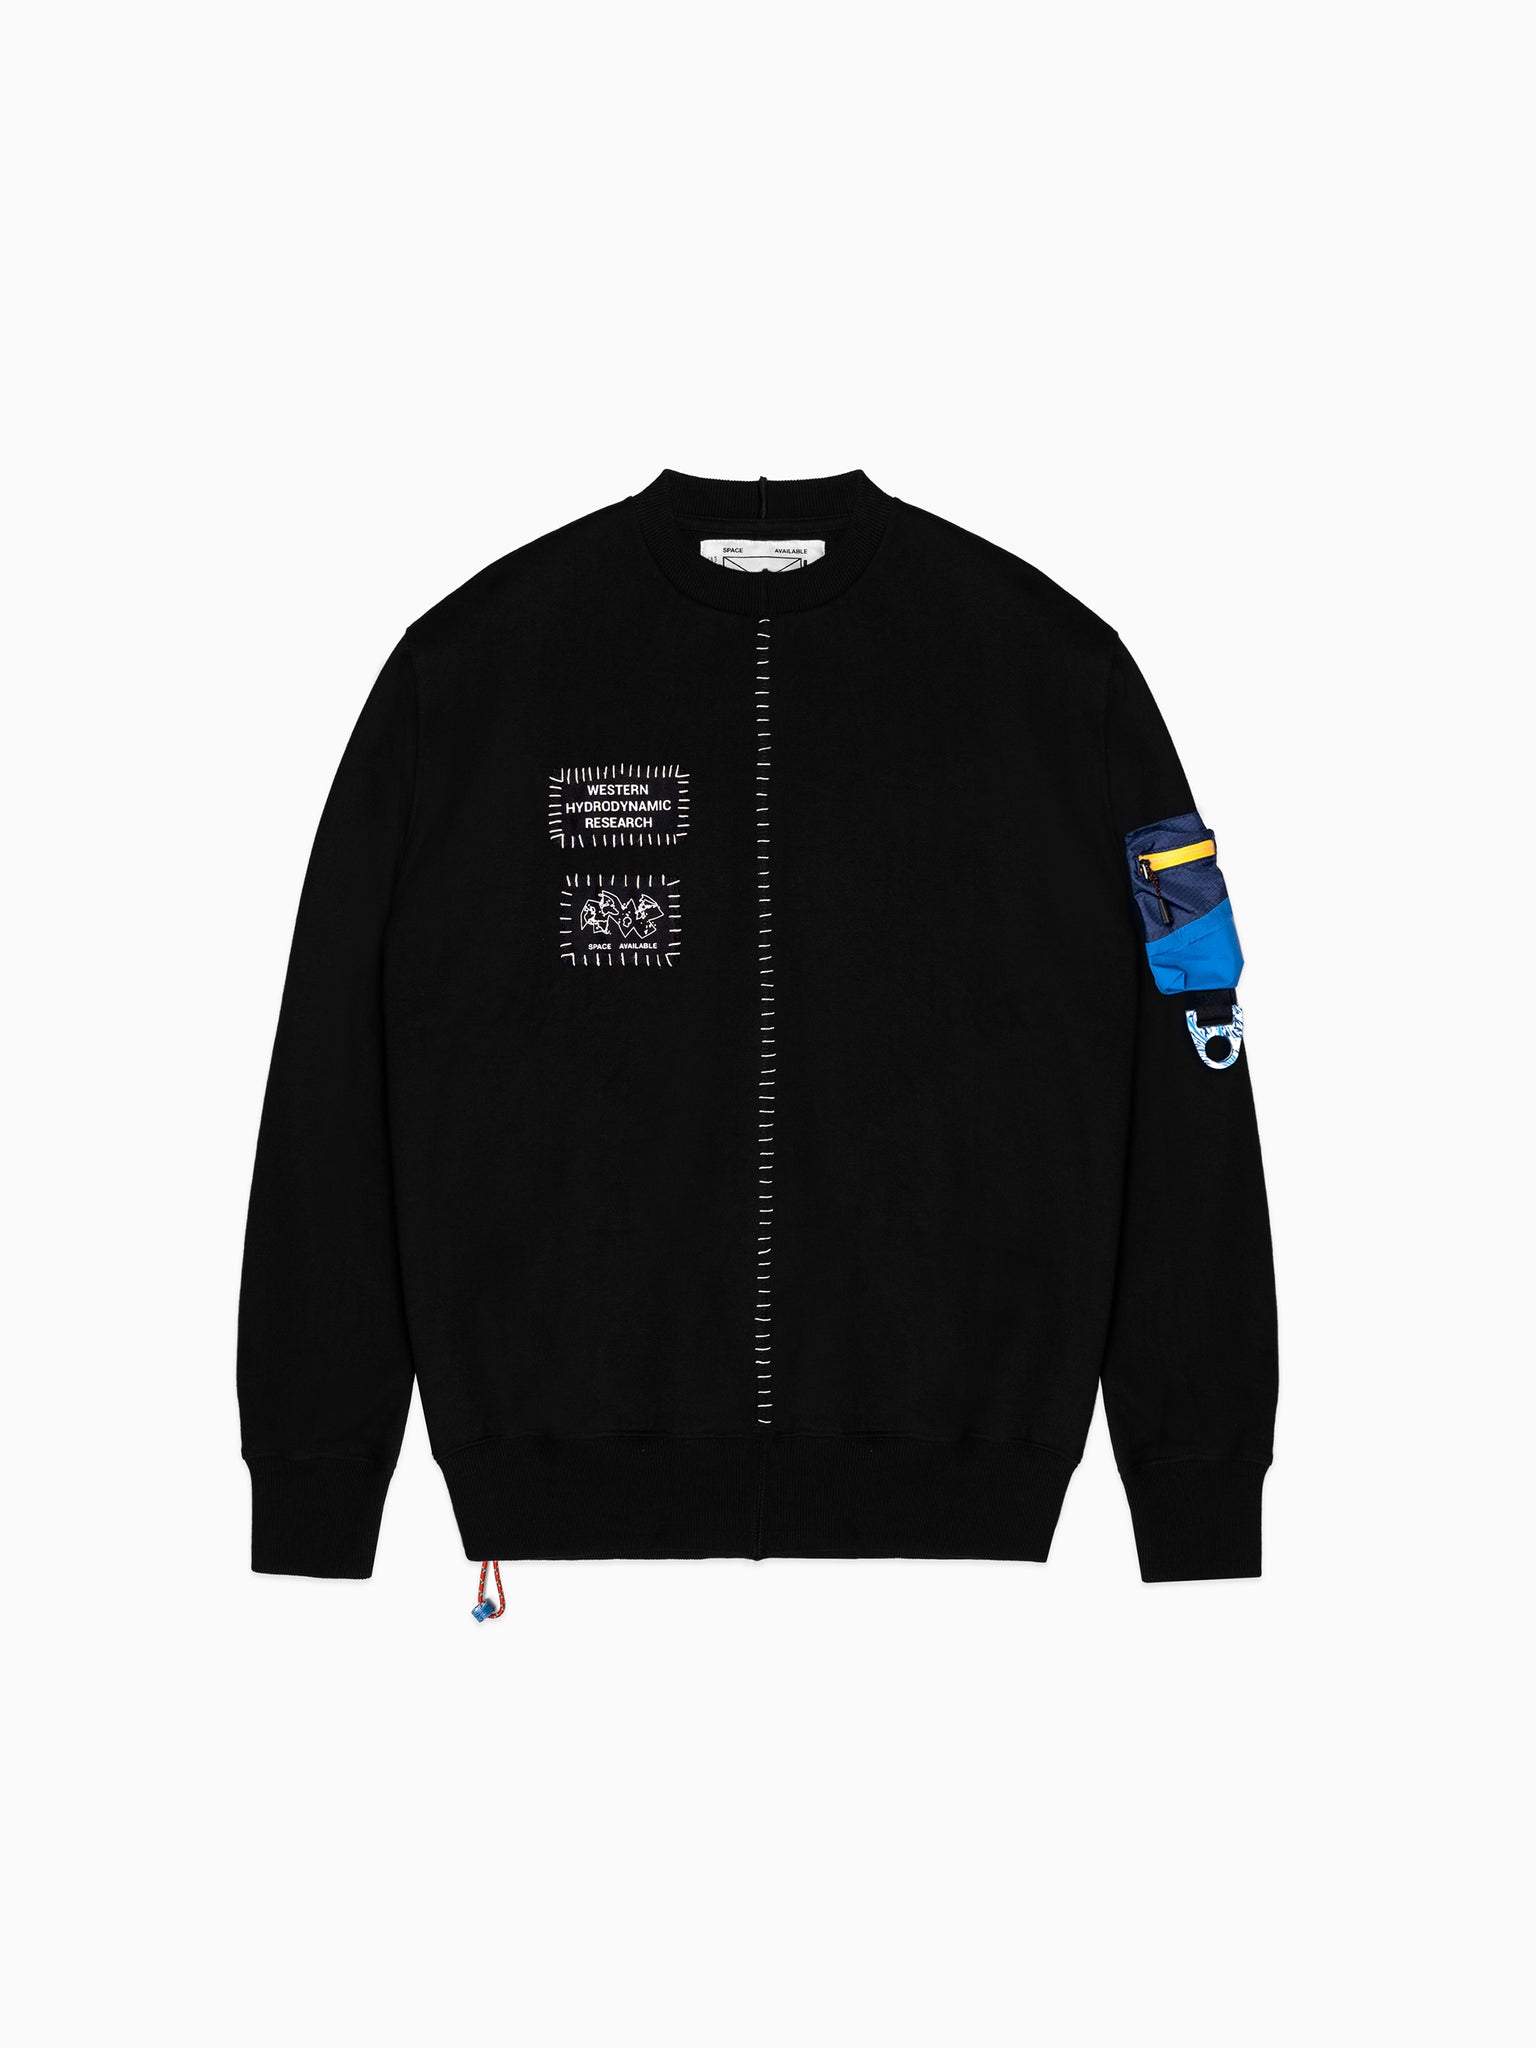 SA X WHR Upcycled Patch Swearshirt Black